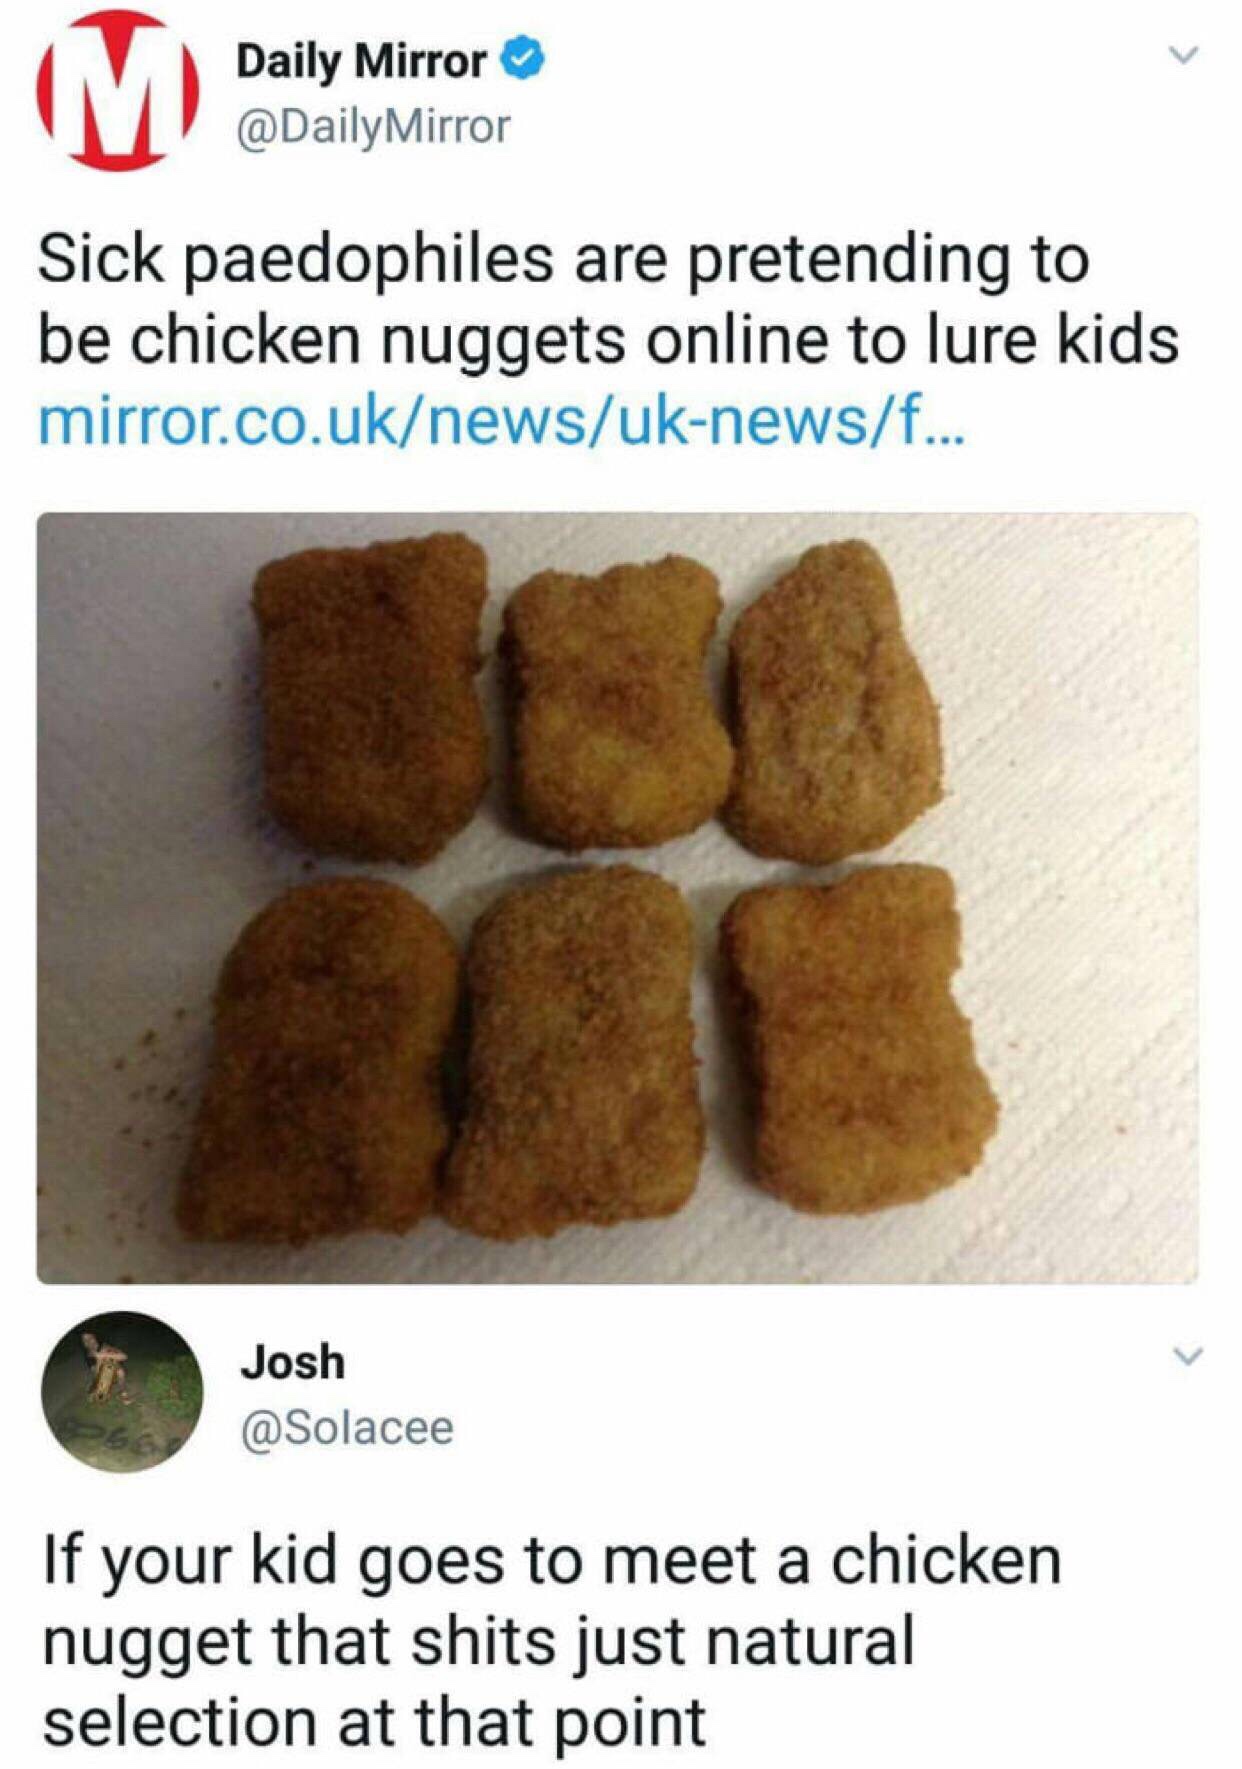 memes - meme pedophiles pretending to be chicken nuggets - Daily Mirror Mirror Sick paedophiles are pretending to be chicken nuggets online to lure kids mirror.co.uknewsuknewsf... Josh If your kid goes to meet a chicken nugget that shits just natural sele